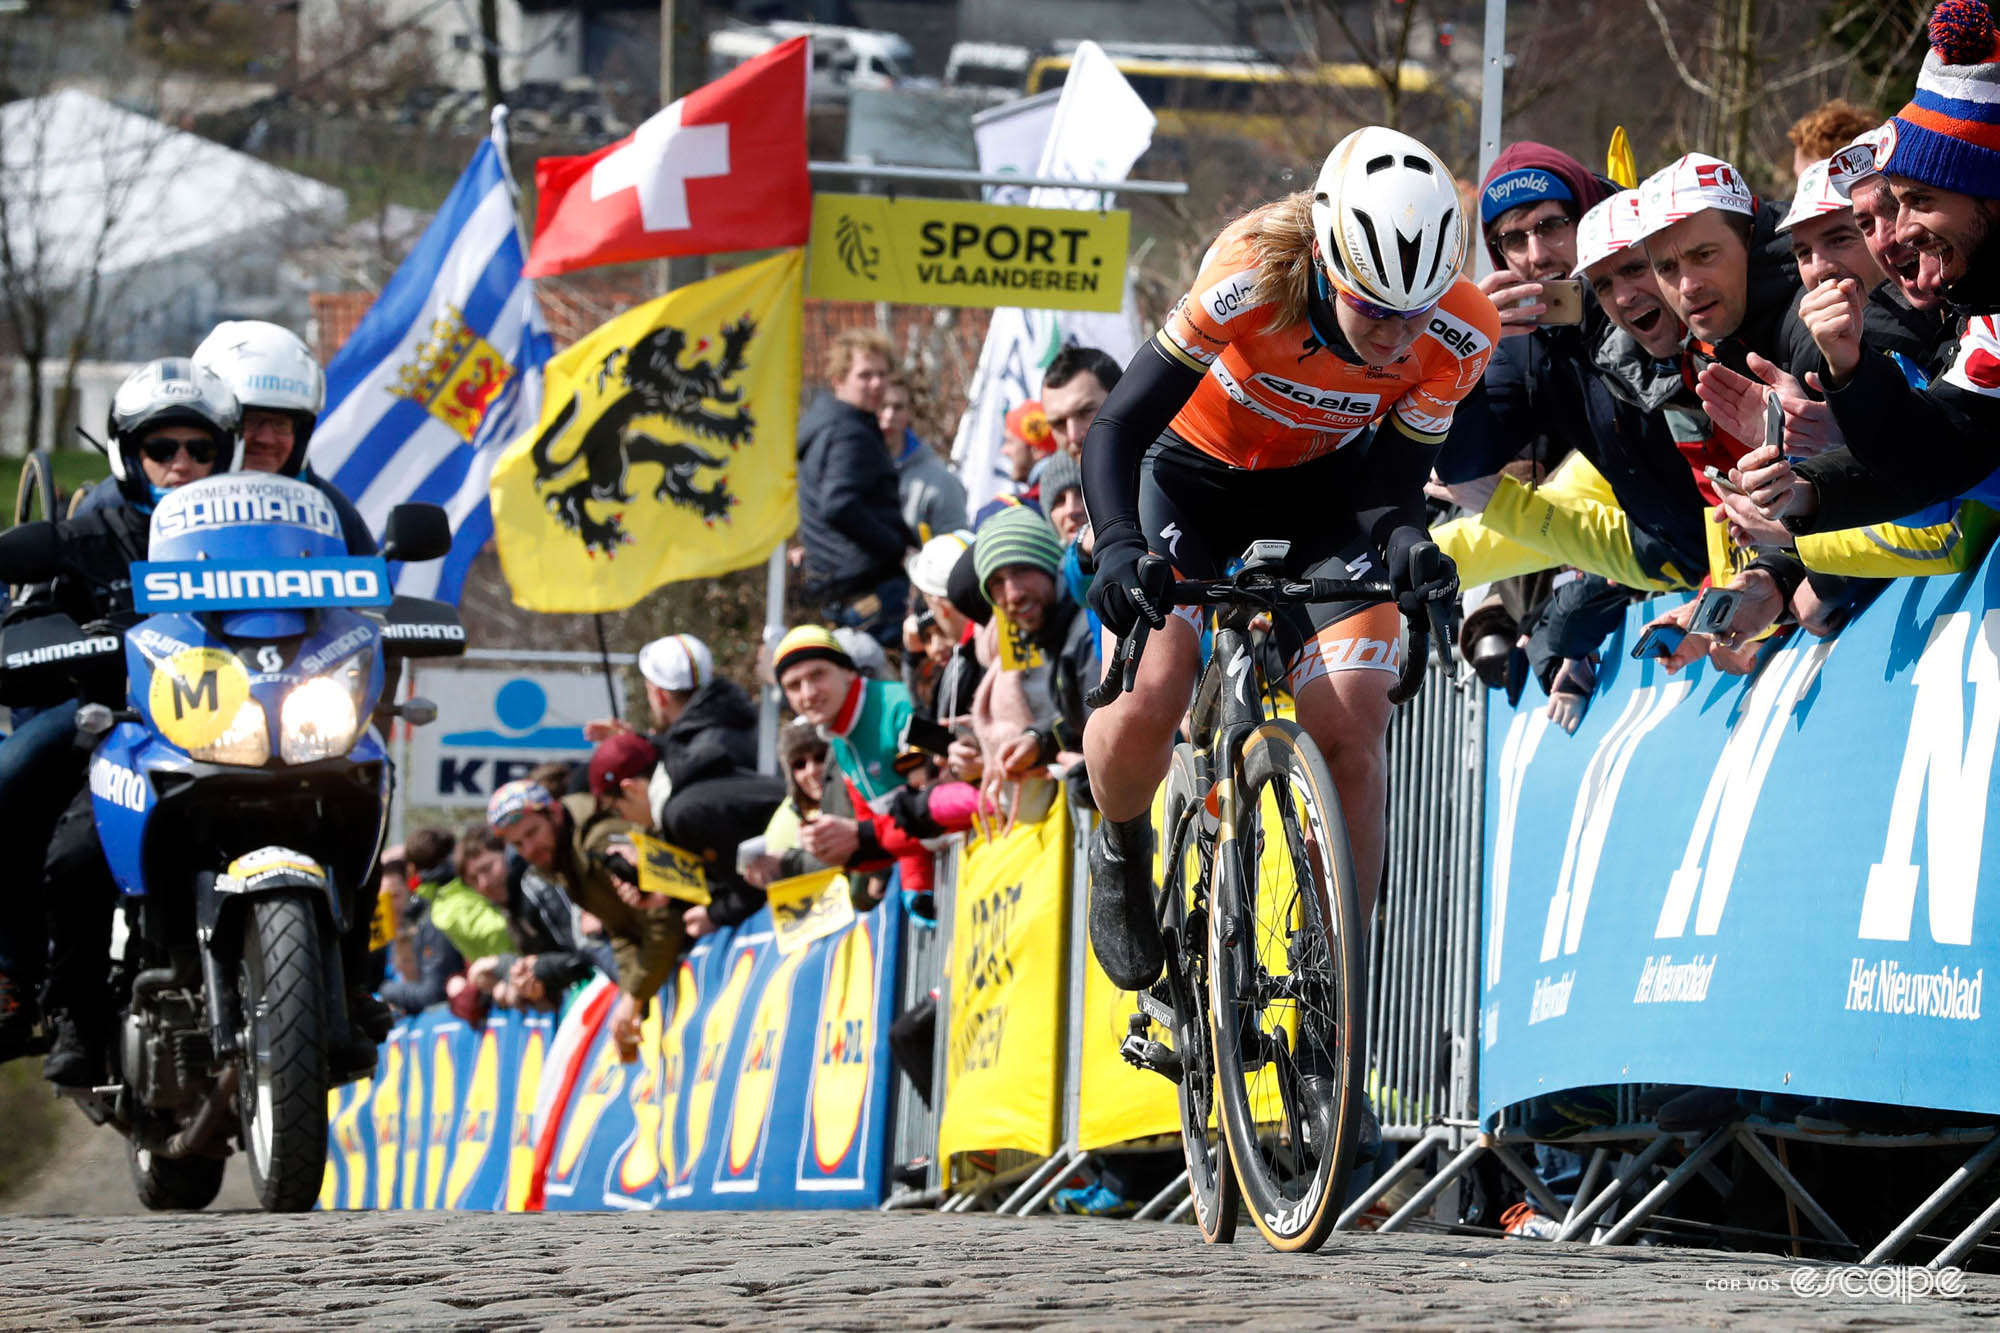 Anna van der Breggen climbs solo on the Paterberg. Her head is down as she focuses on the task, and behind onl a Shimano neutral support moto and fans lining the barriers are seen; there are no other competitors in the picture.